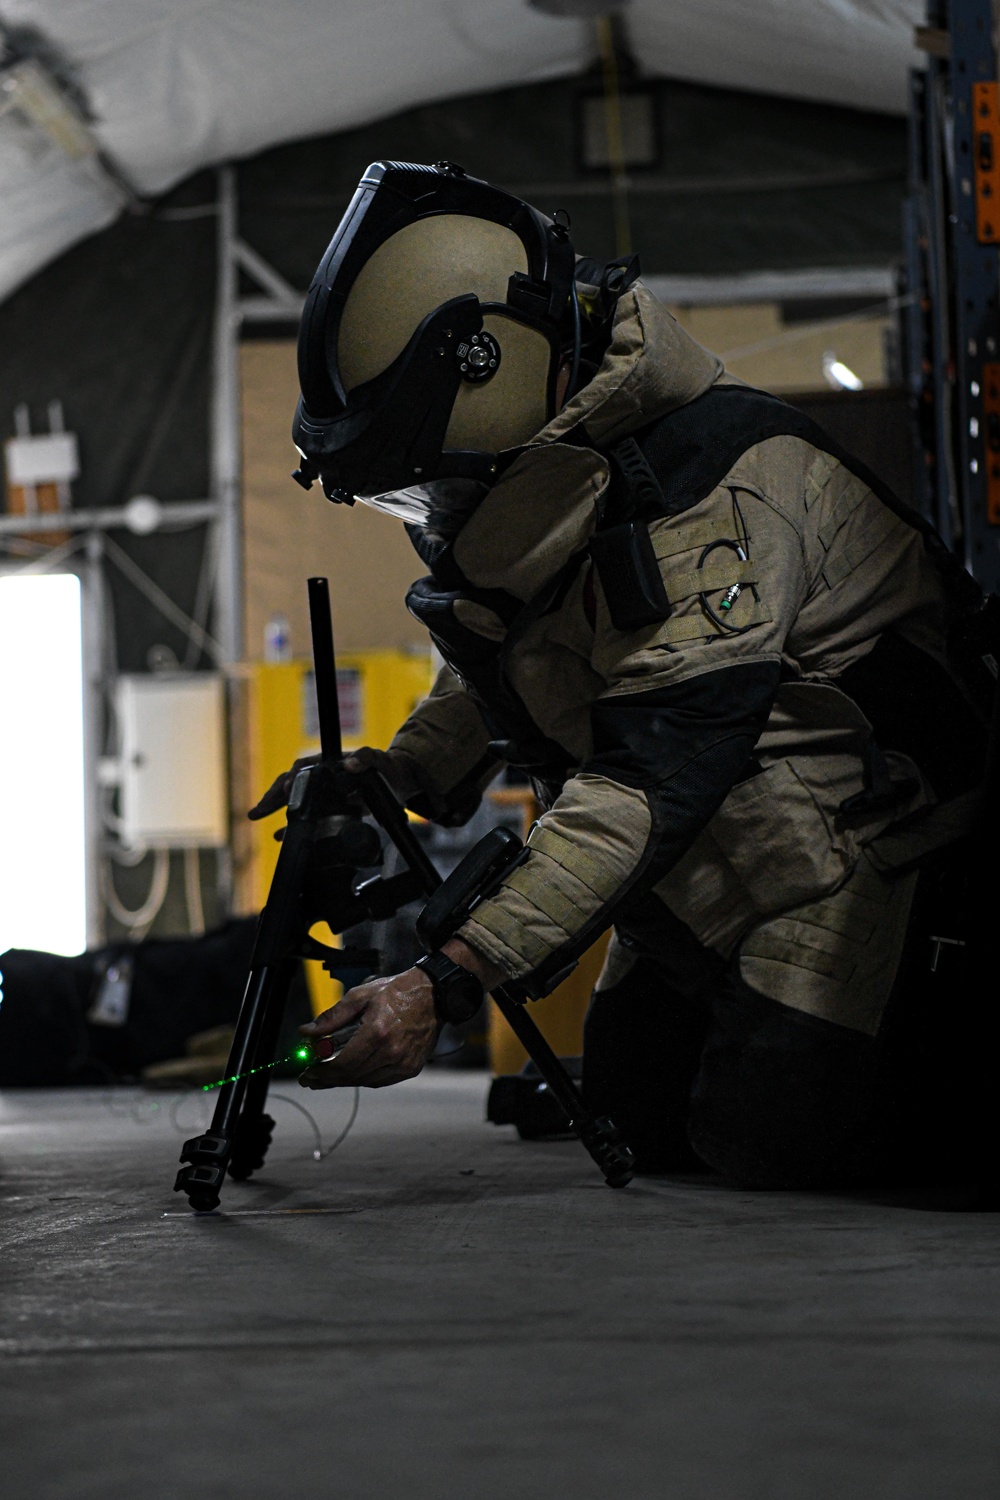 380th EOD competes in skills challenge